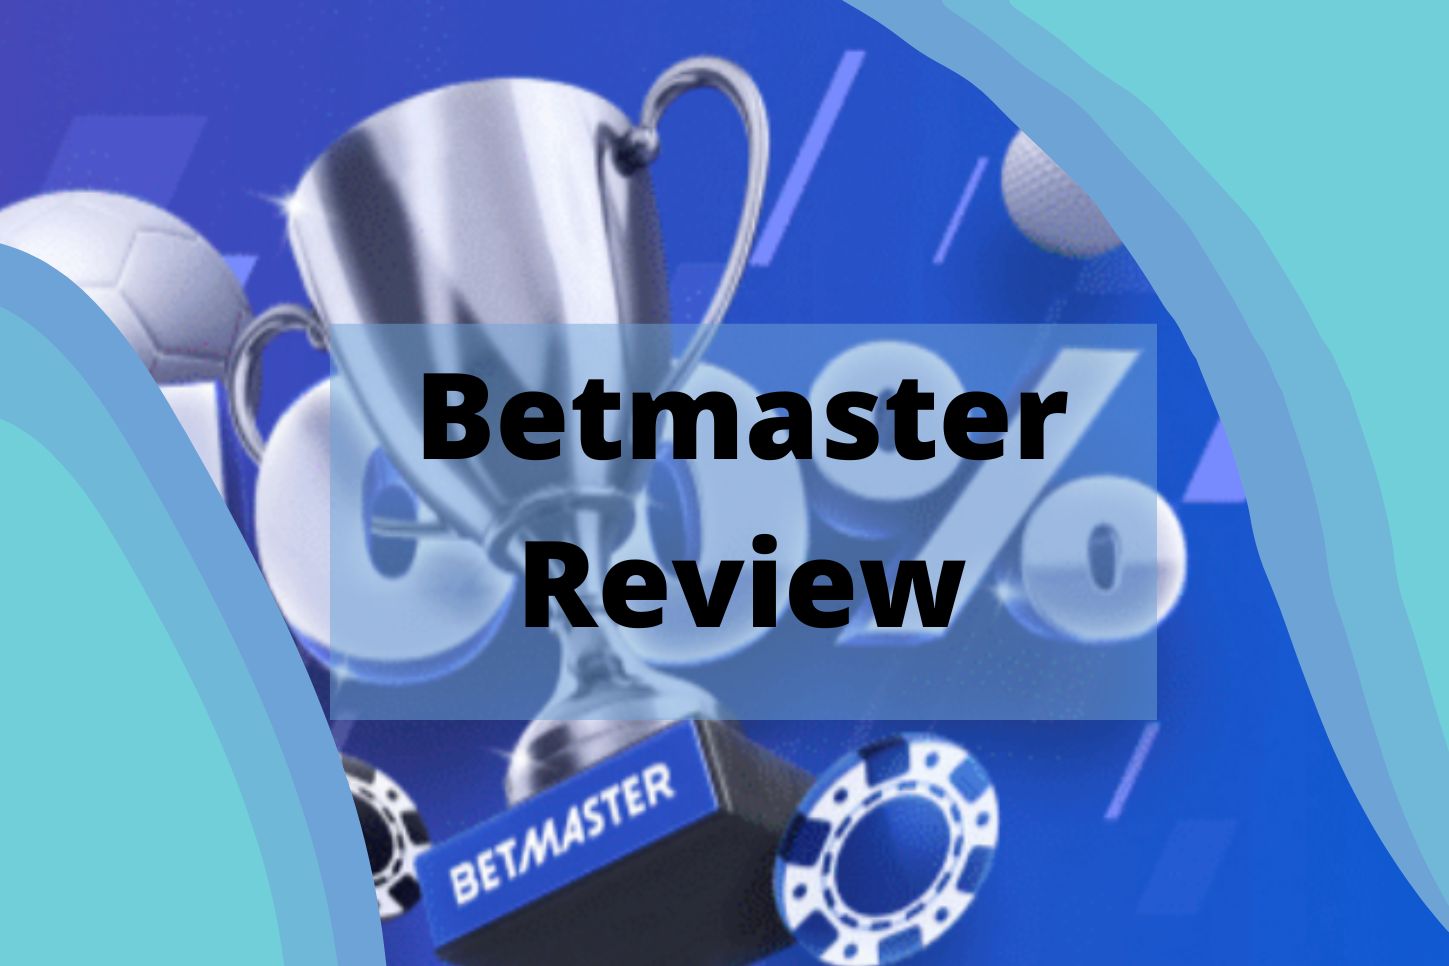 exciting betting experience with Betmaster online bookmaker